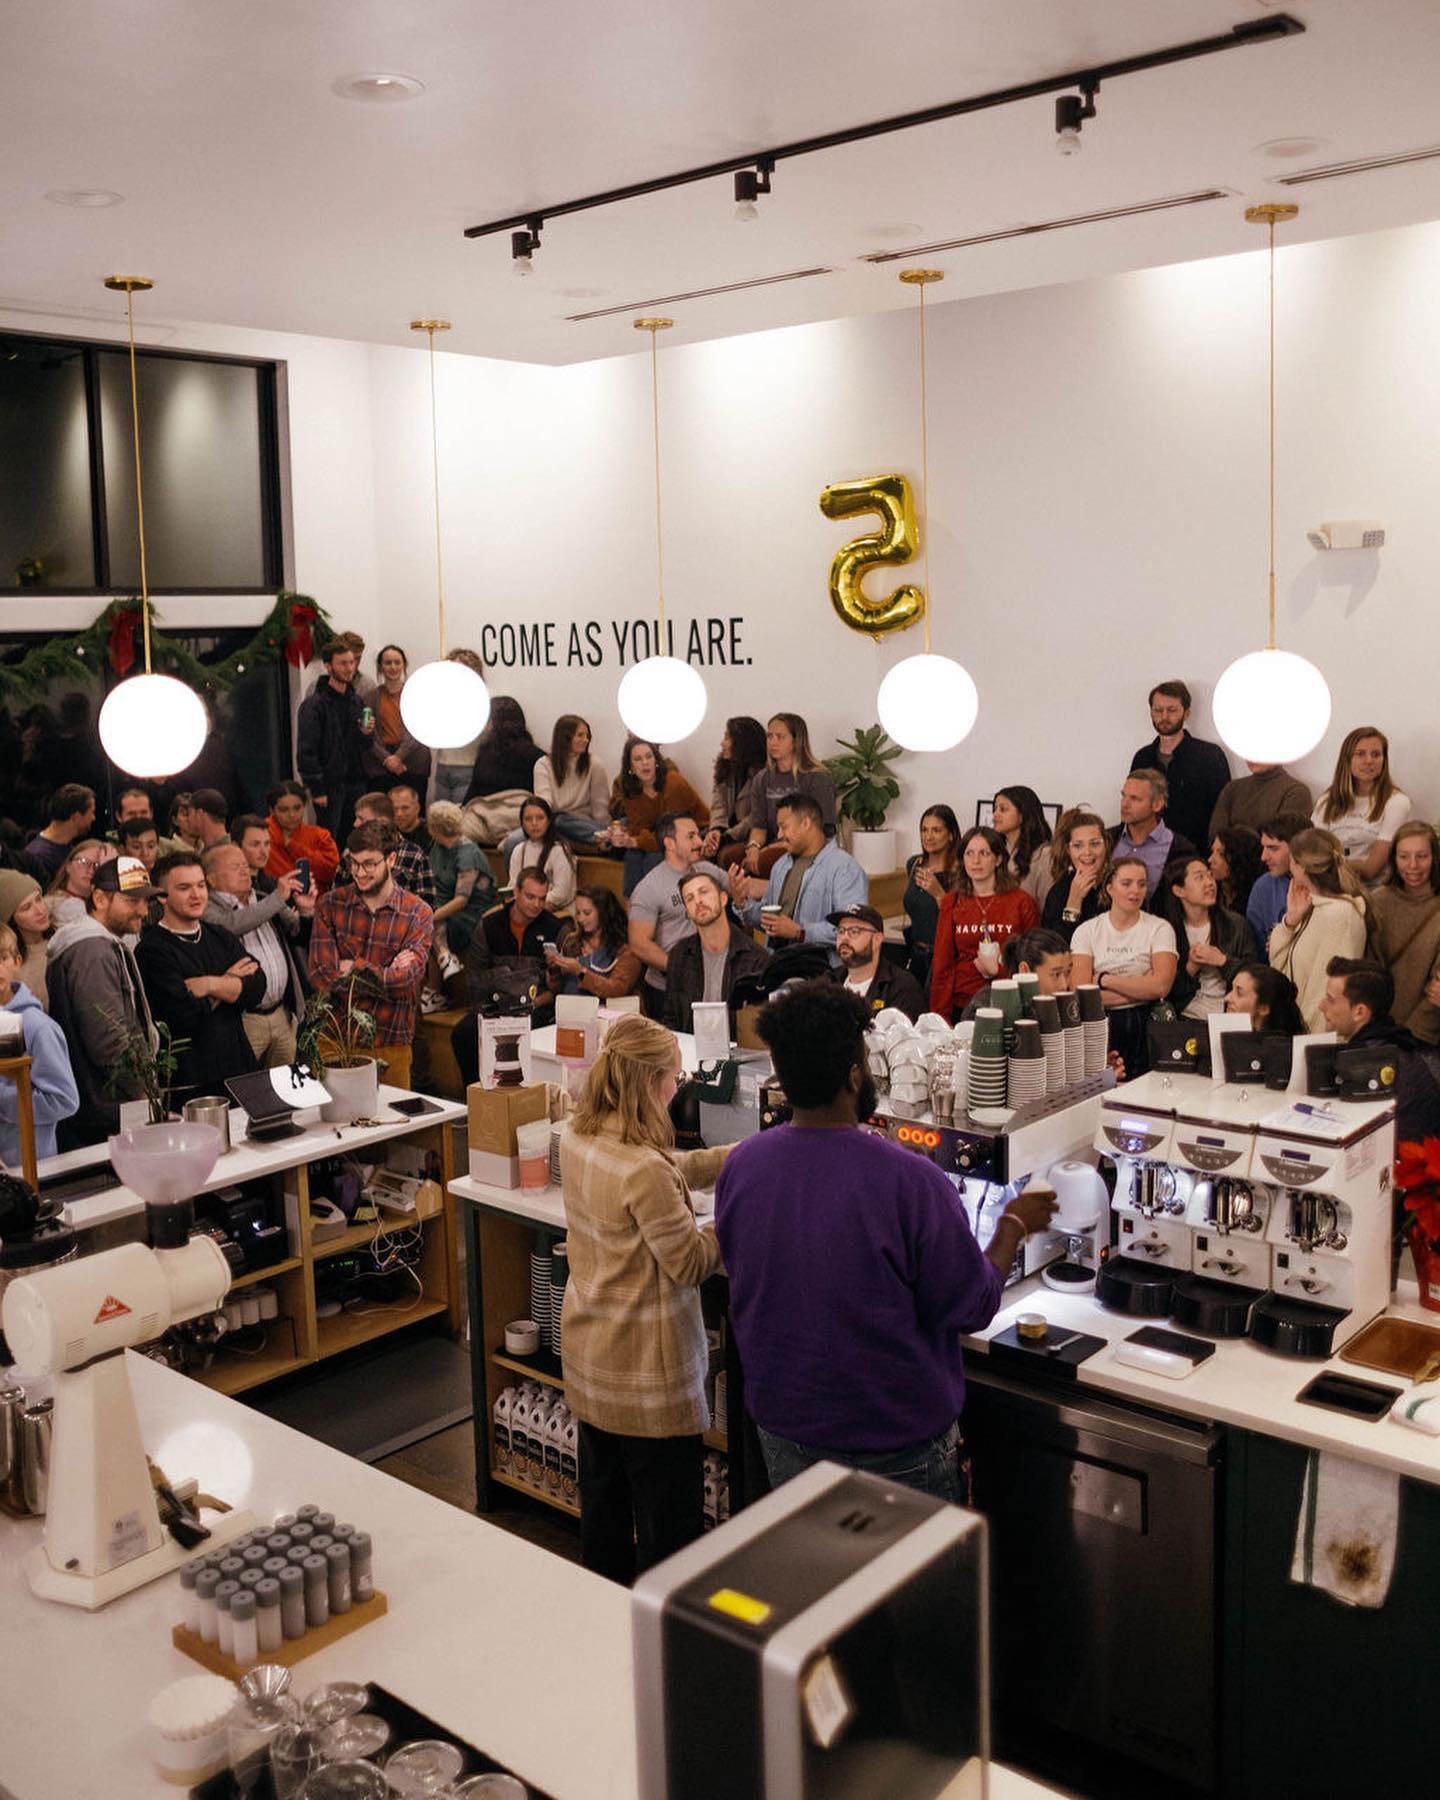 Throwback to the THROWDOWN! There was no better way to celebrate year 5. Thanks to all who attended and participated! 

TOP THREE:
🥇 @capp4tim (Jubala)
🥈 Andrew (Jubala)
🥉 @oliviakgwyn (Fount)

SPONSORS:
@counterculturecoffee @blackwhiteroasters @